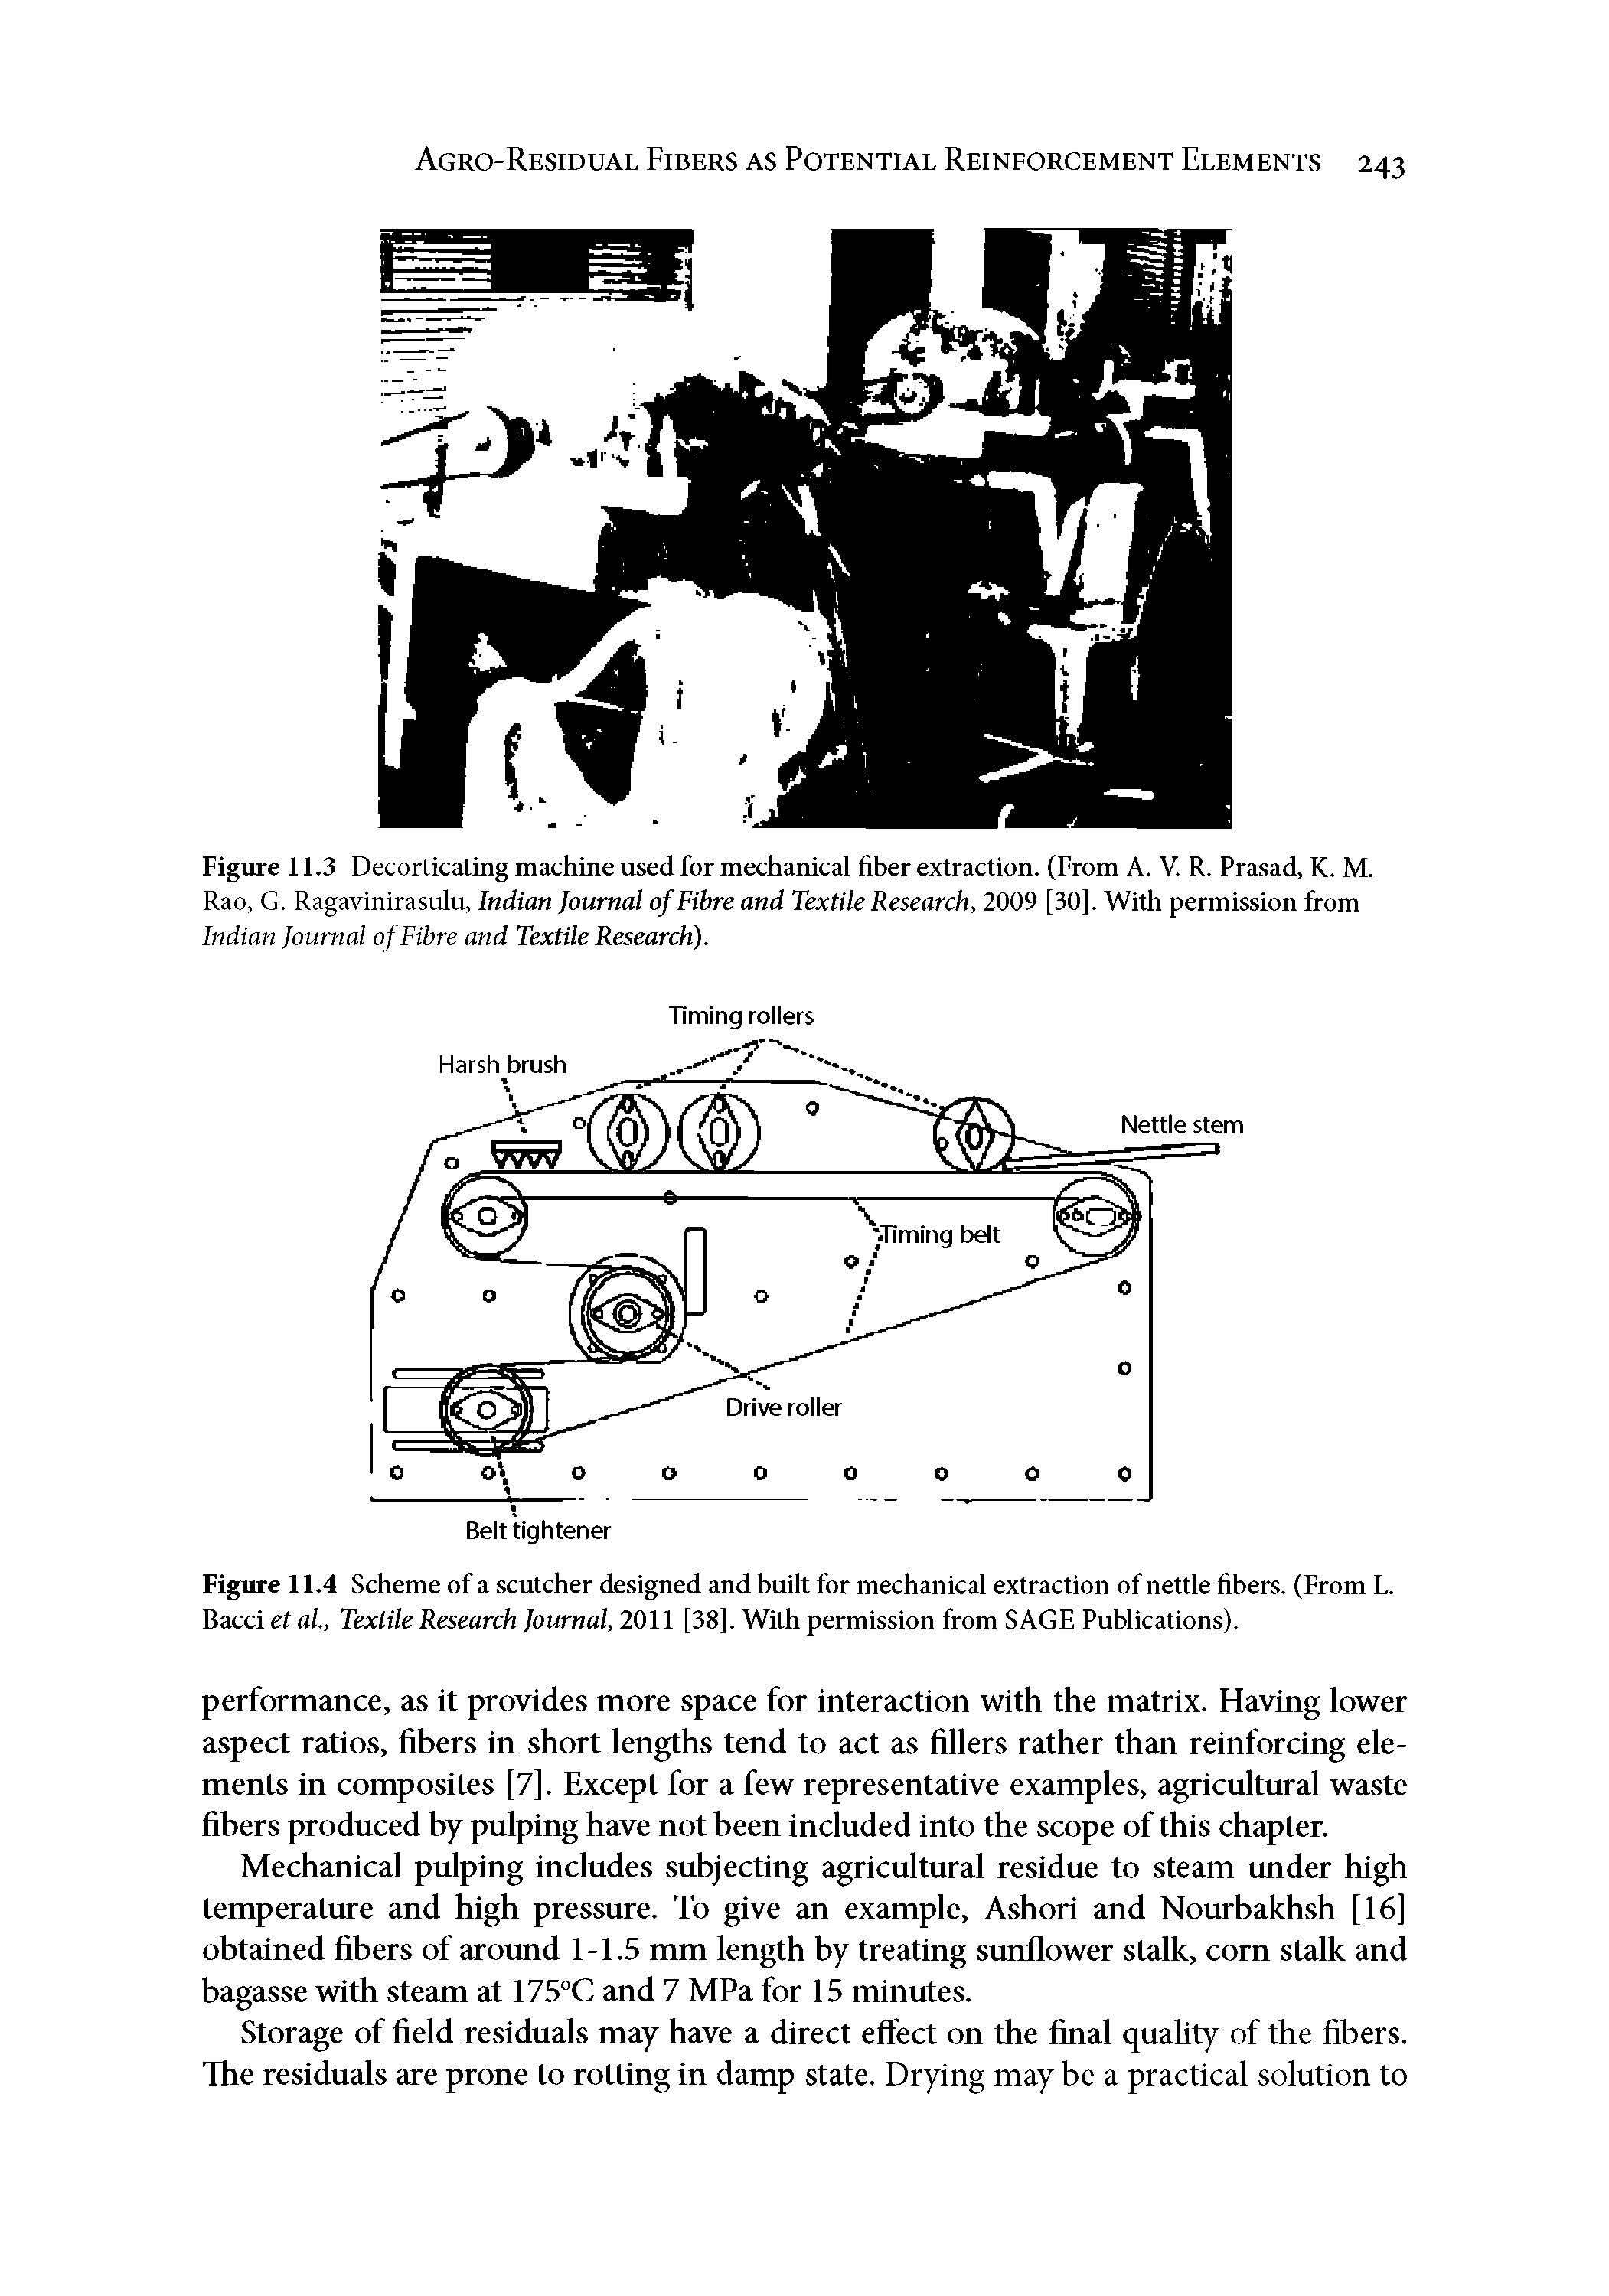 Figure 11.3 Decorticating machine used for mechanical fiber extraction. (From A. V. R. Prasad, K. M. Rao, G. Ragavmrrasulu, Indian Journal of Fibre and Textile Research, 2009 [30]. With permission from Indian Journal of Fibre and Textile Research).